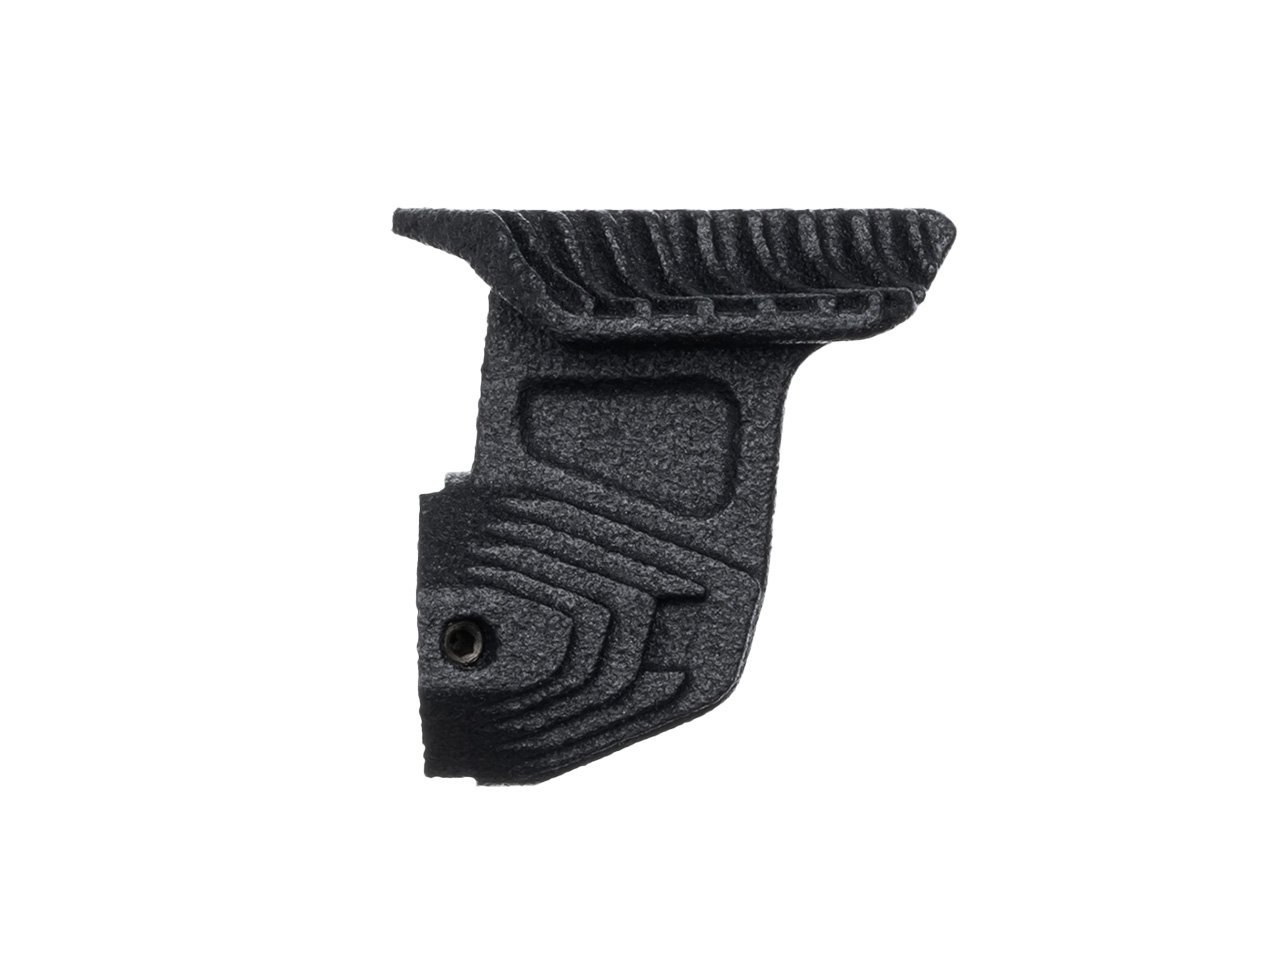 Paddle Shifter V2 for SureFire X300 - Right Handed - Sukerucom 